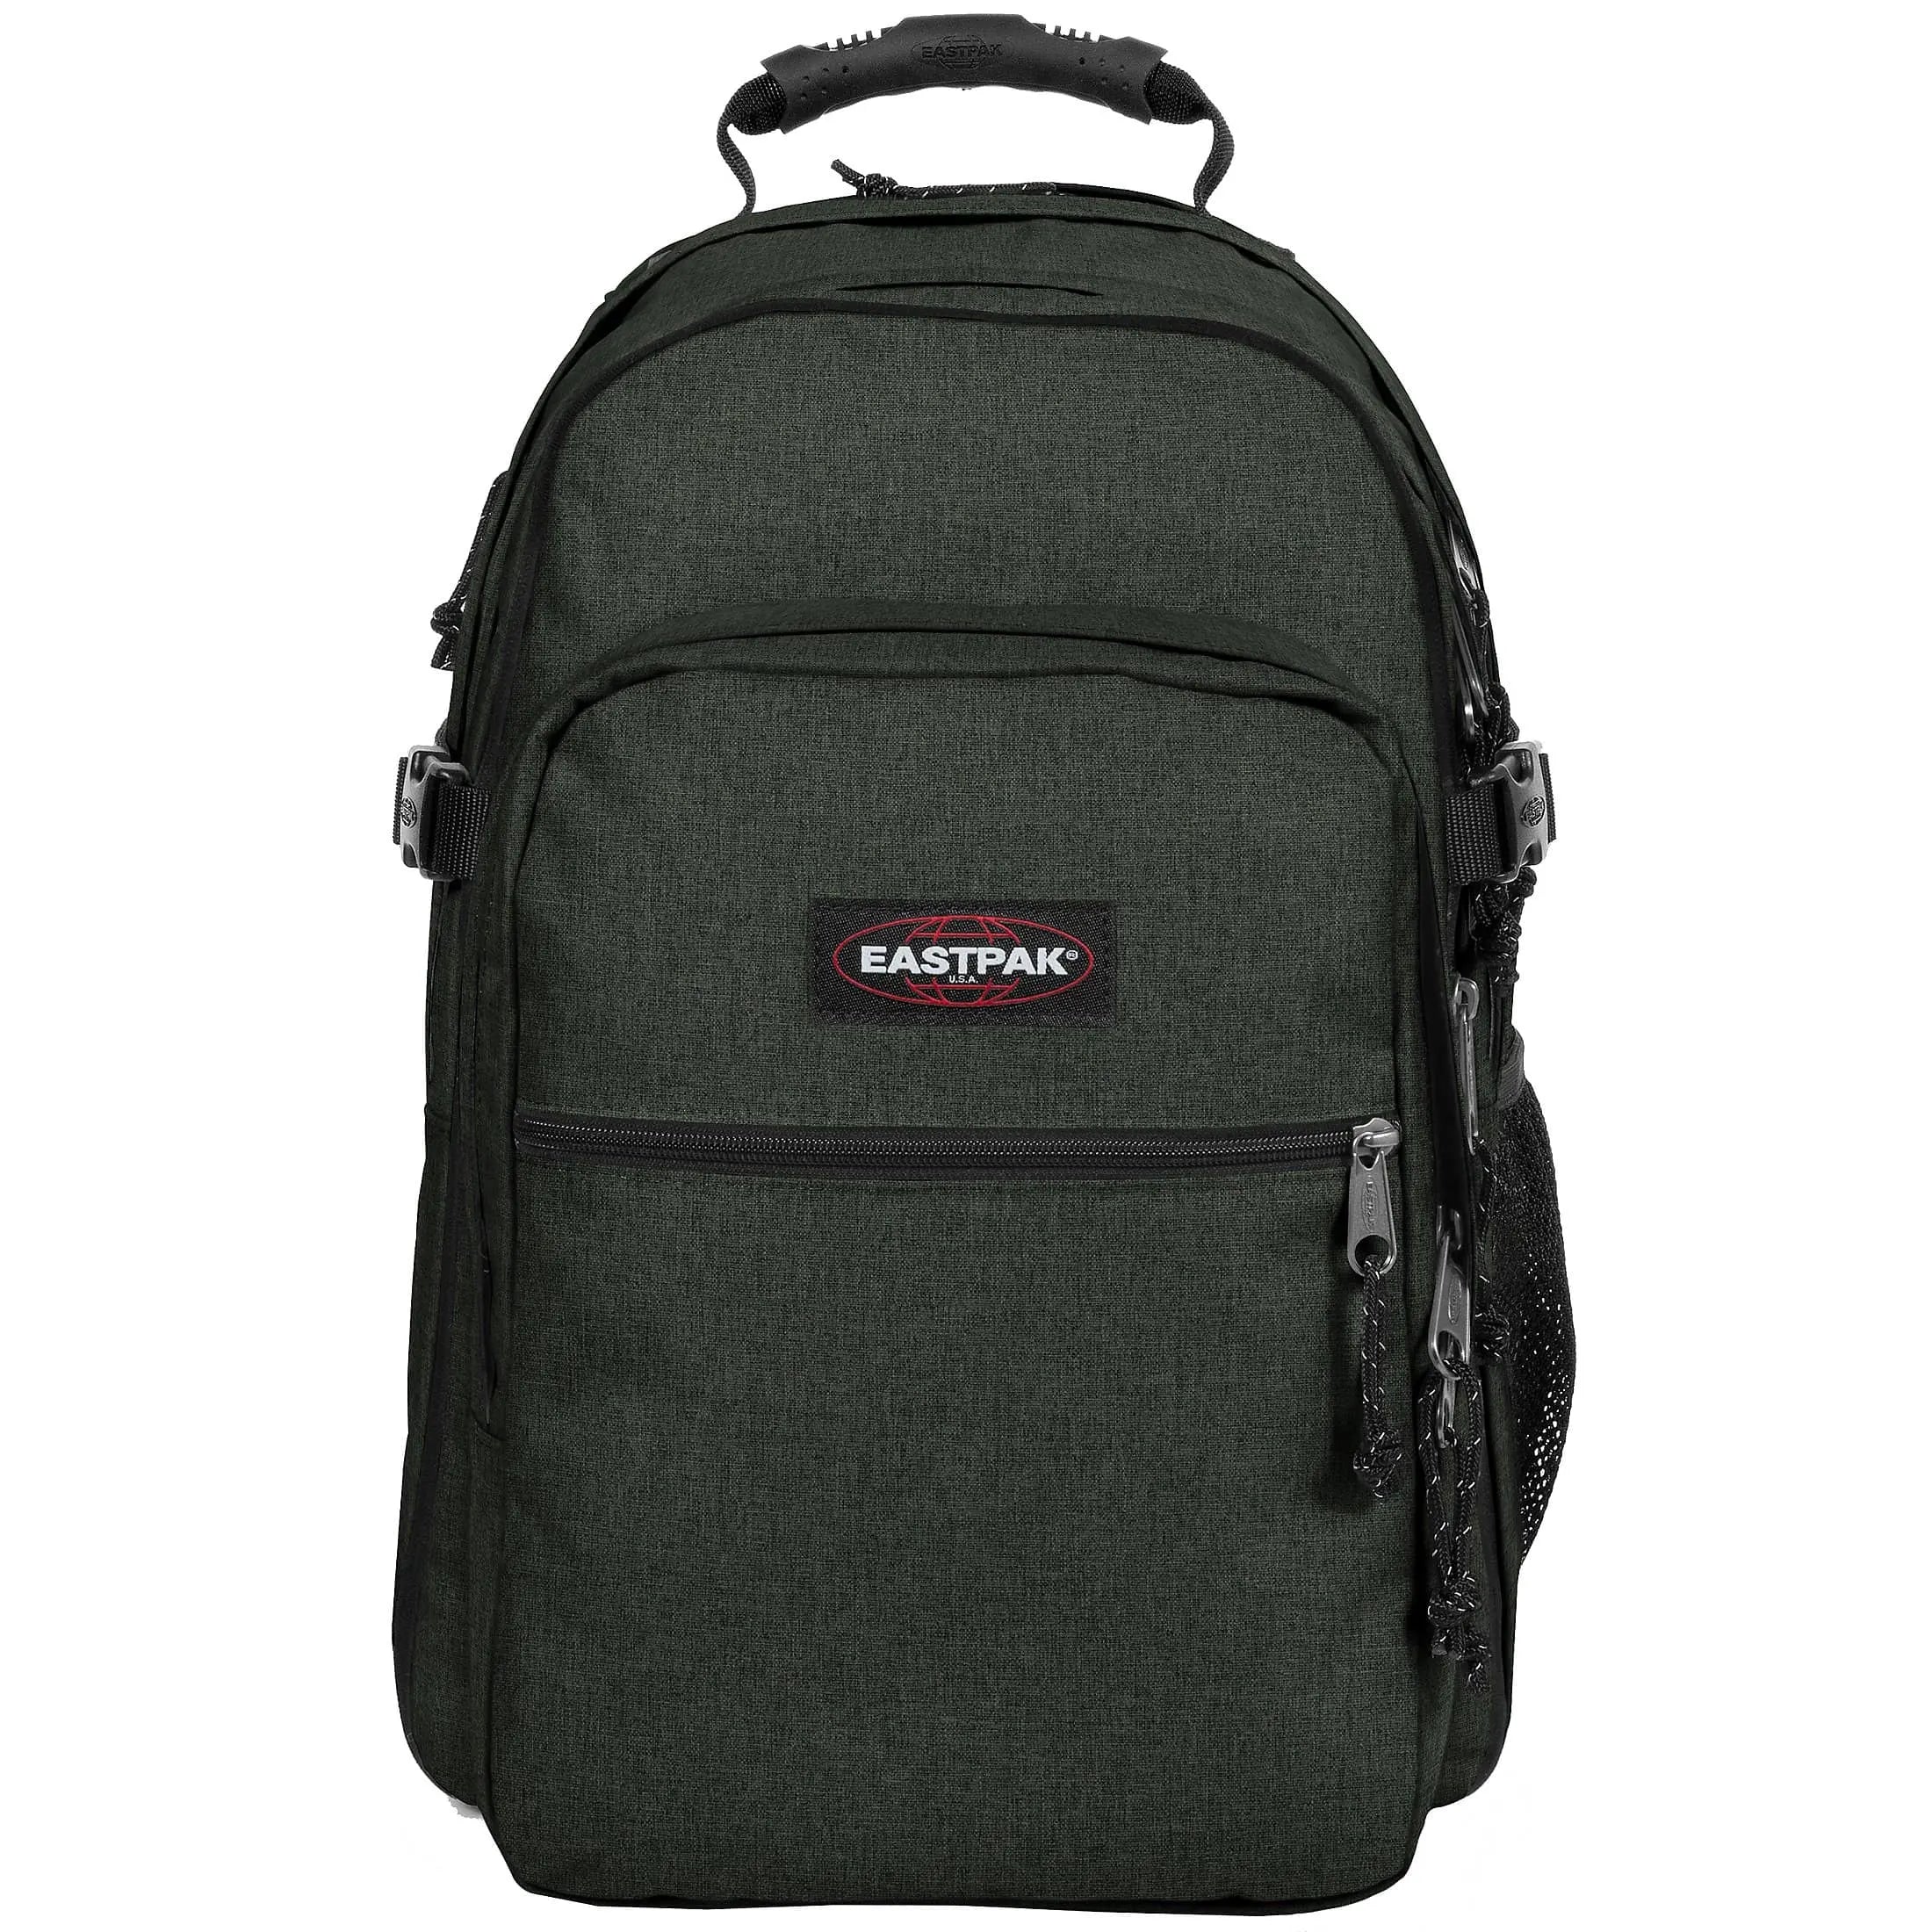 Eastpak Authentic Re-Check Tutor backpack with laptop compartment 48 cm - crafty moss